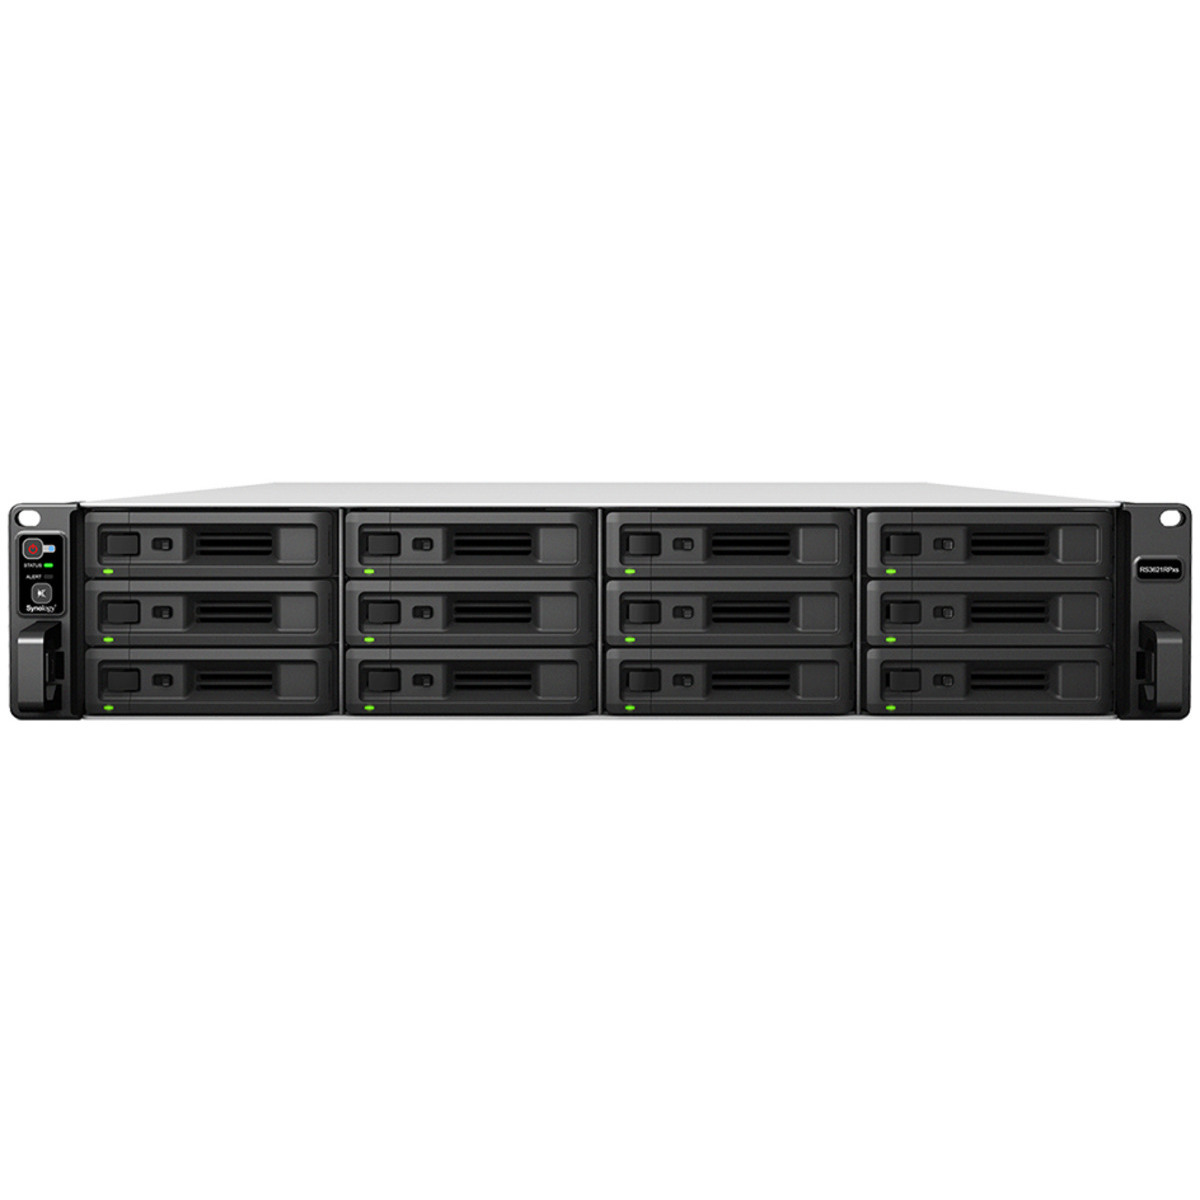 Synology RackStation RS3621RPxs 60tb 12-Bay RackMount Large Business / Enterprise NAS - Network Attached Storage Device 10x6tb Seagate EXOS 7E10 ST6000NM019B 3.5 7200rpm SATA 6Gb/s HDD ENTERPRISE Class Drives Installed - Burn-In Tested RackStation RS3621RPxs